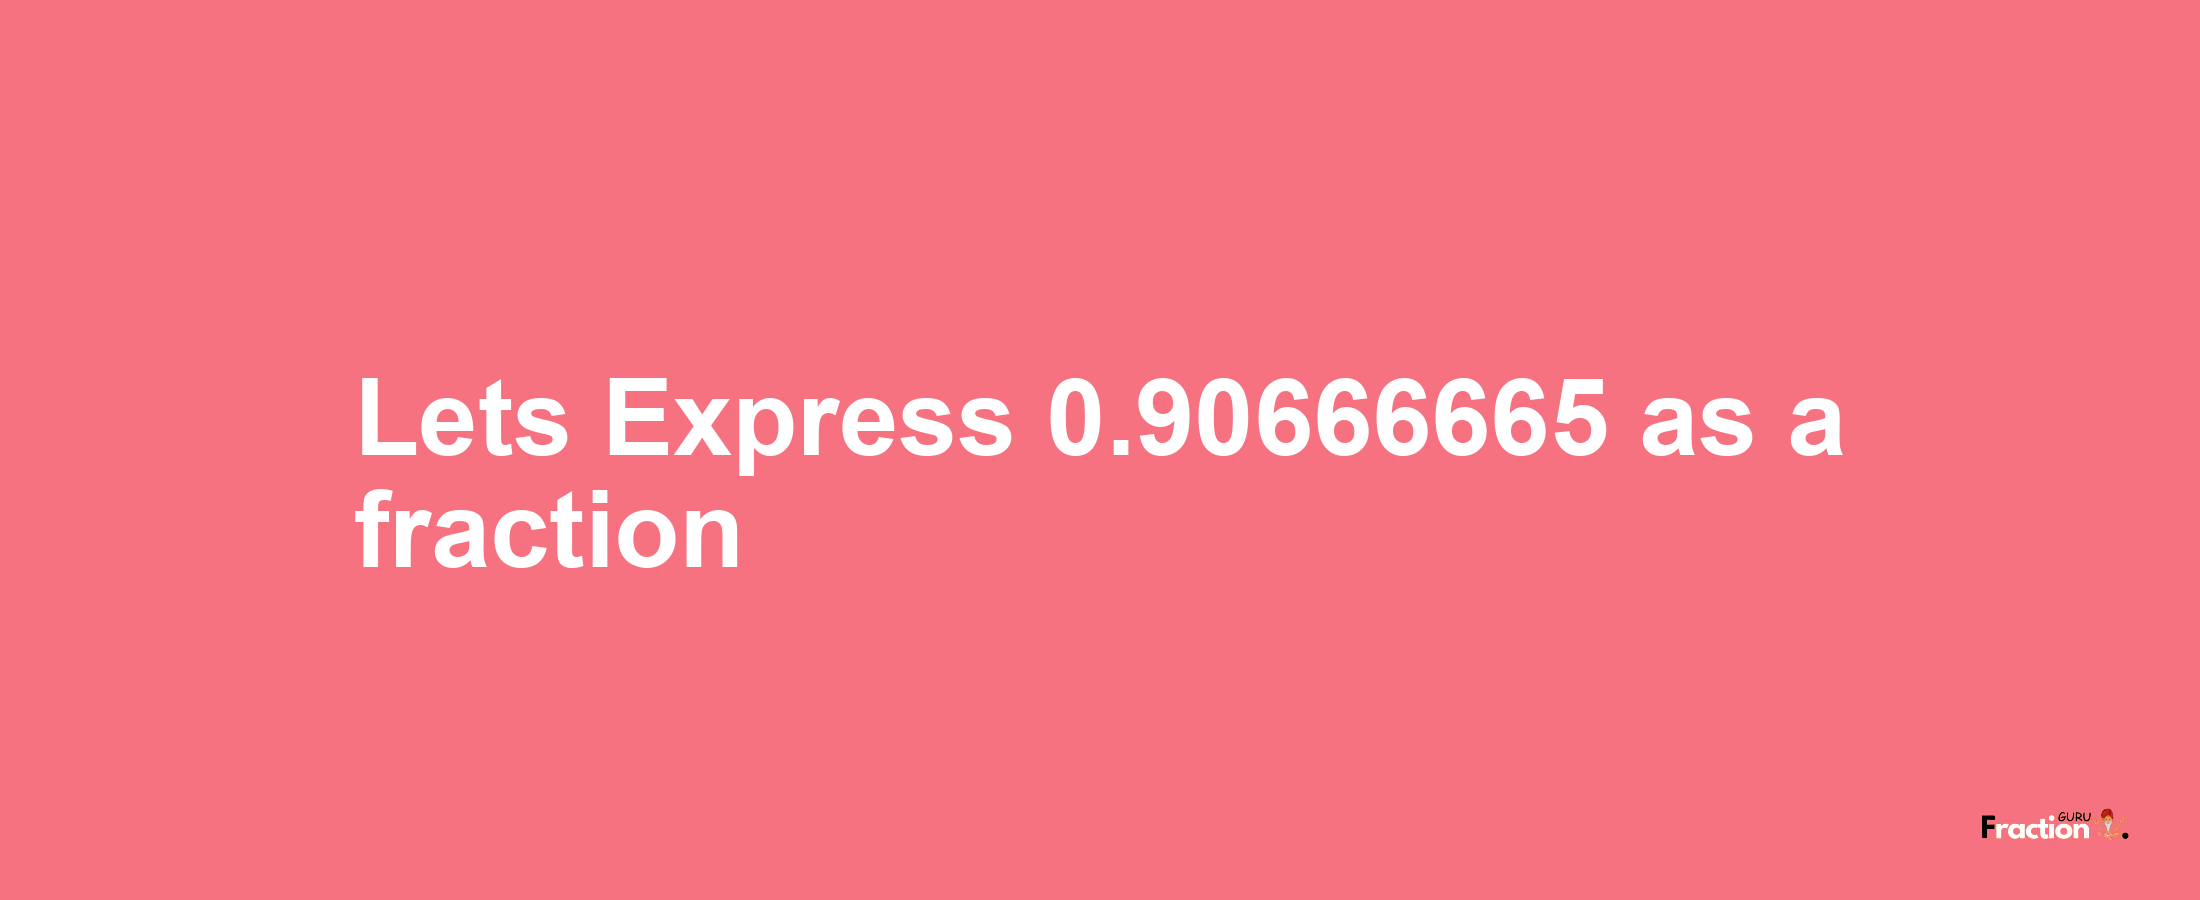 Lets Express 0.90666665 as afraction